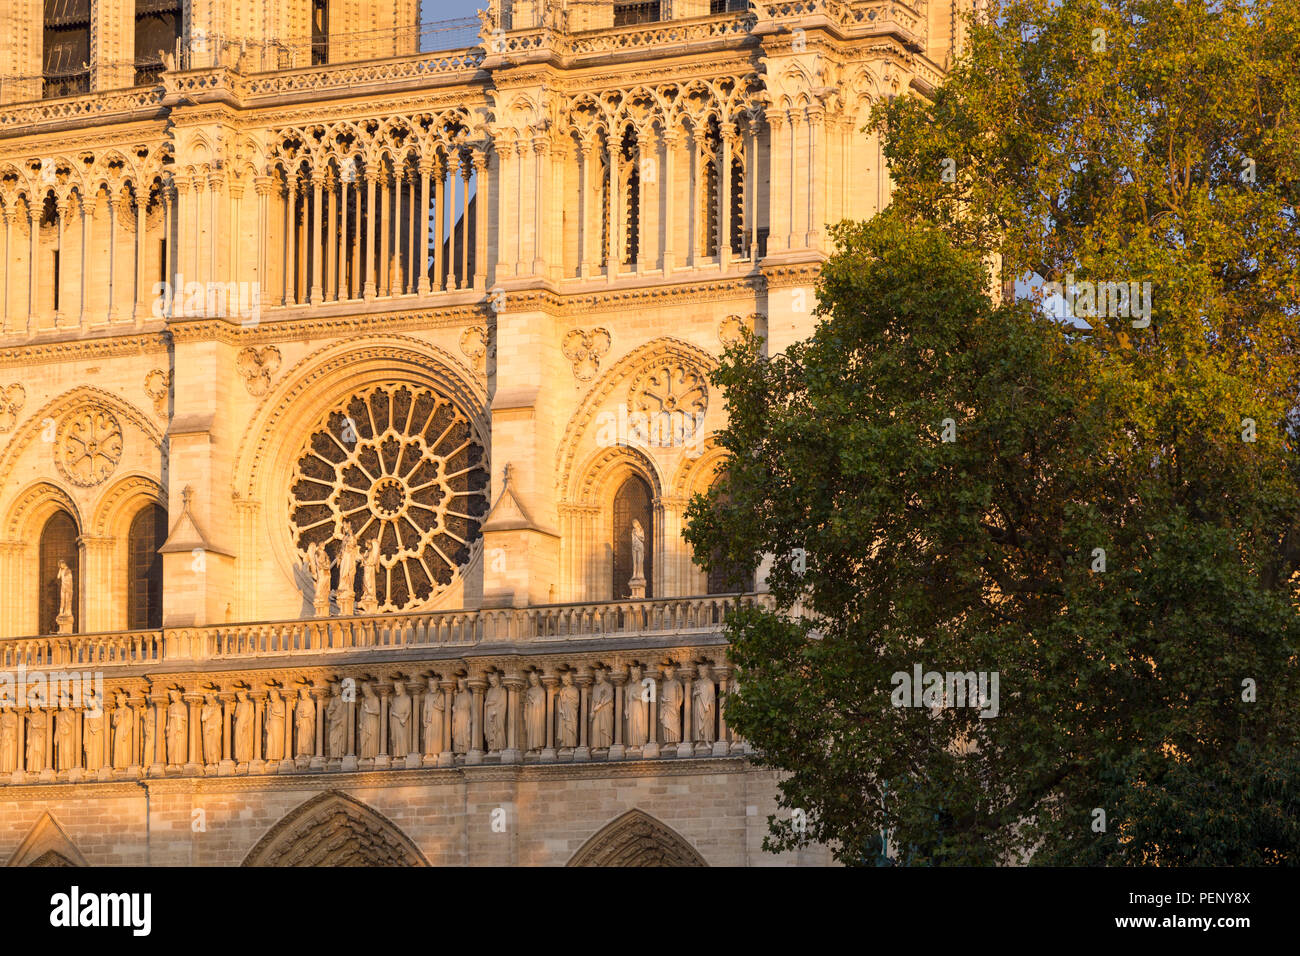 Setting sunlight on the front facade of Cathedral Notre Dame, Paris, France Stock Photo